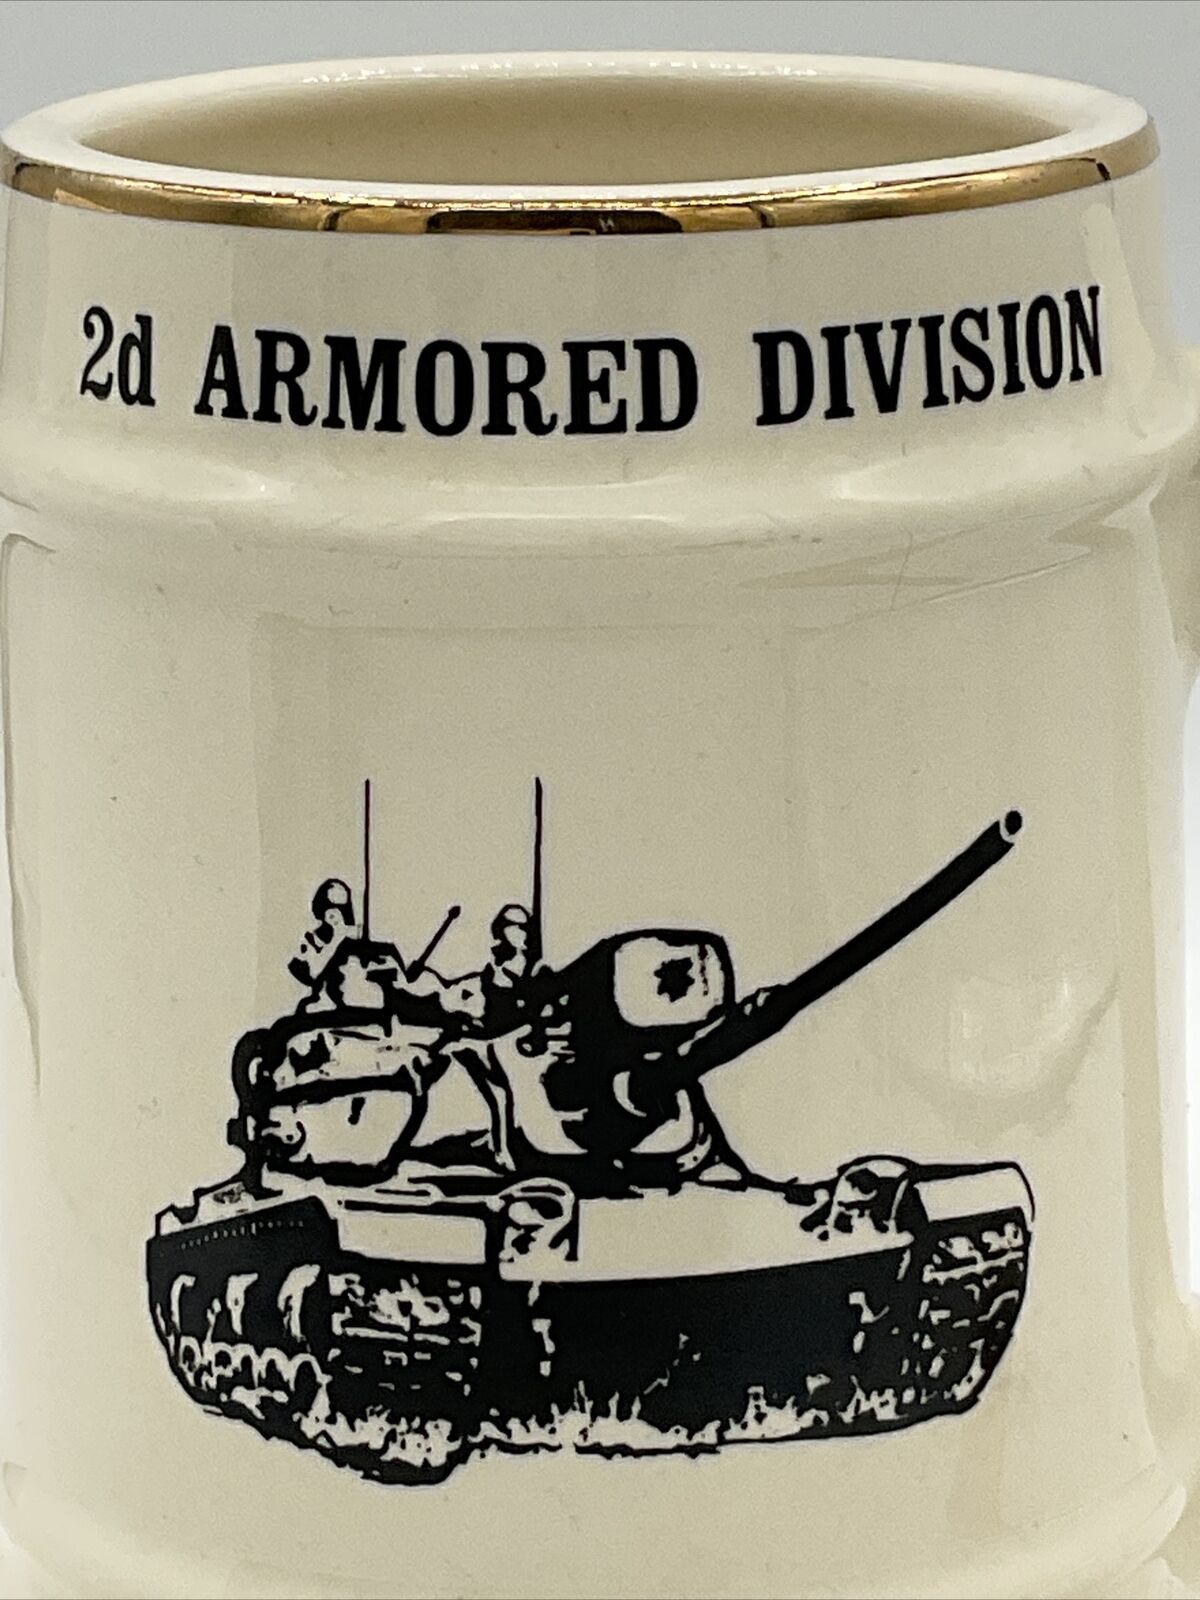 Vintage 2nd Armored Division Mug Beer Stein Tank Military Service Co.